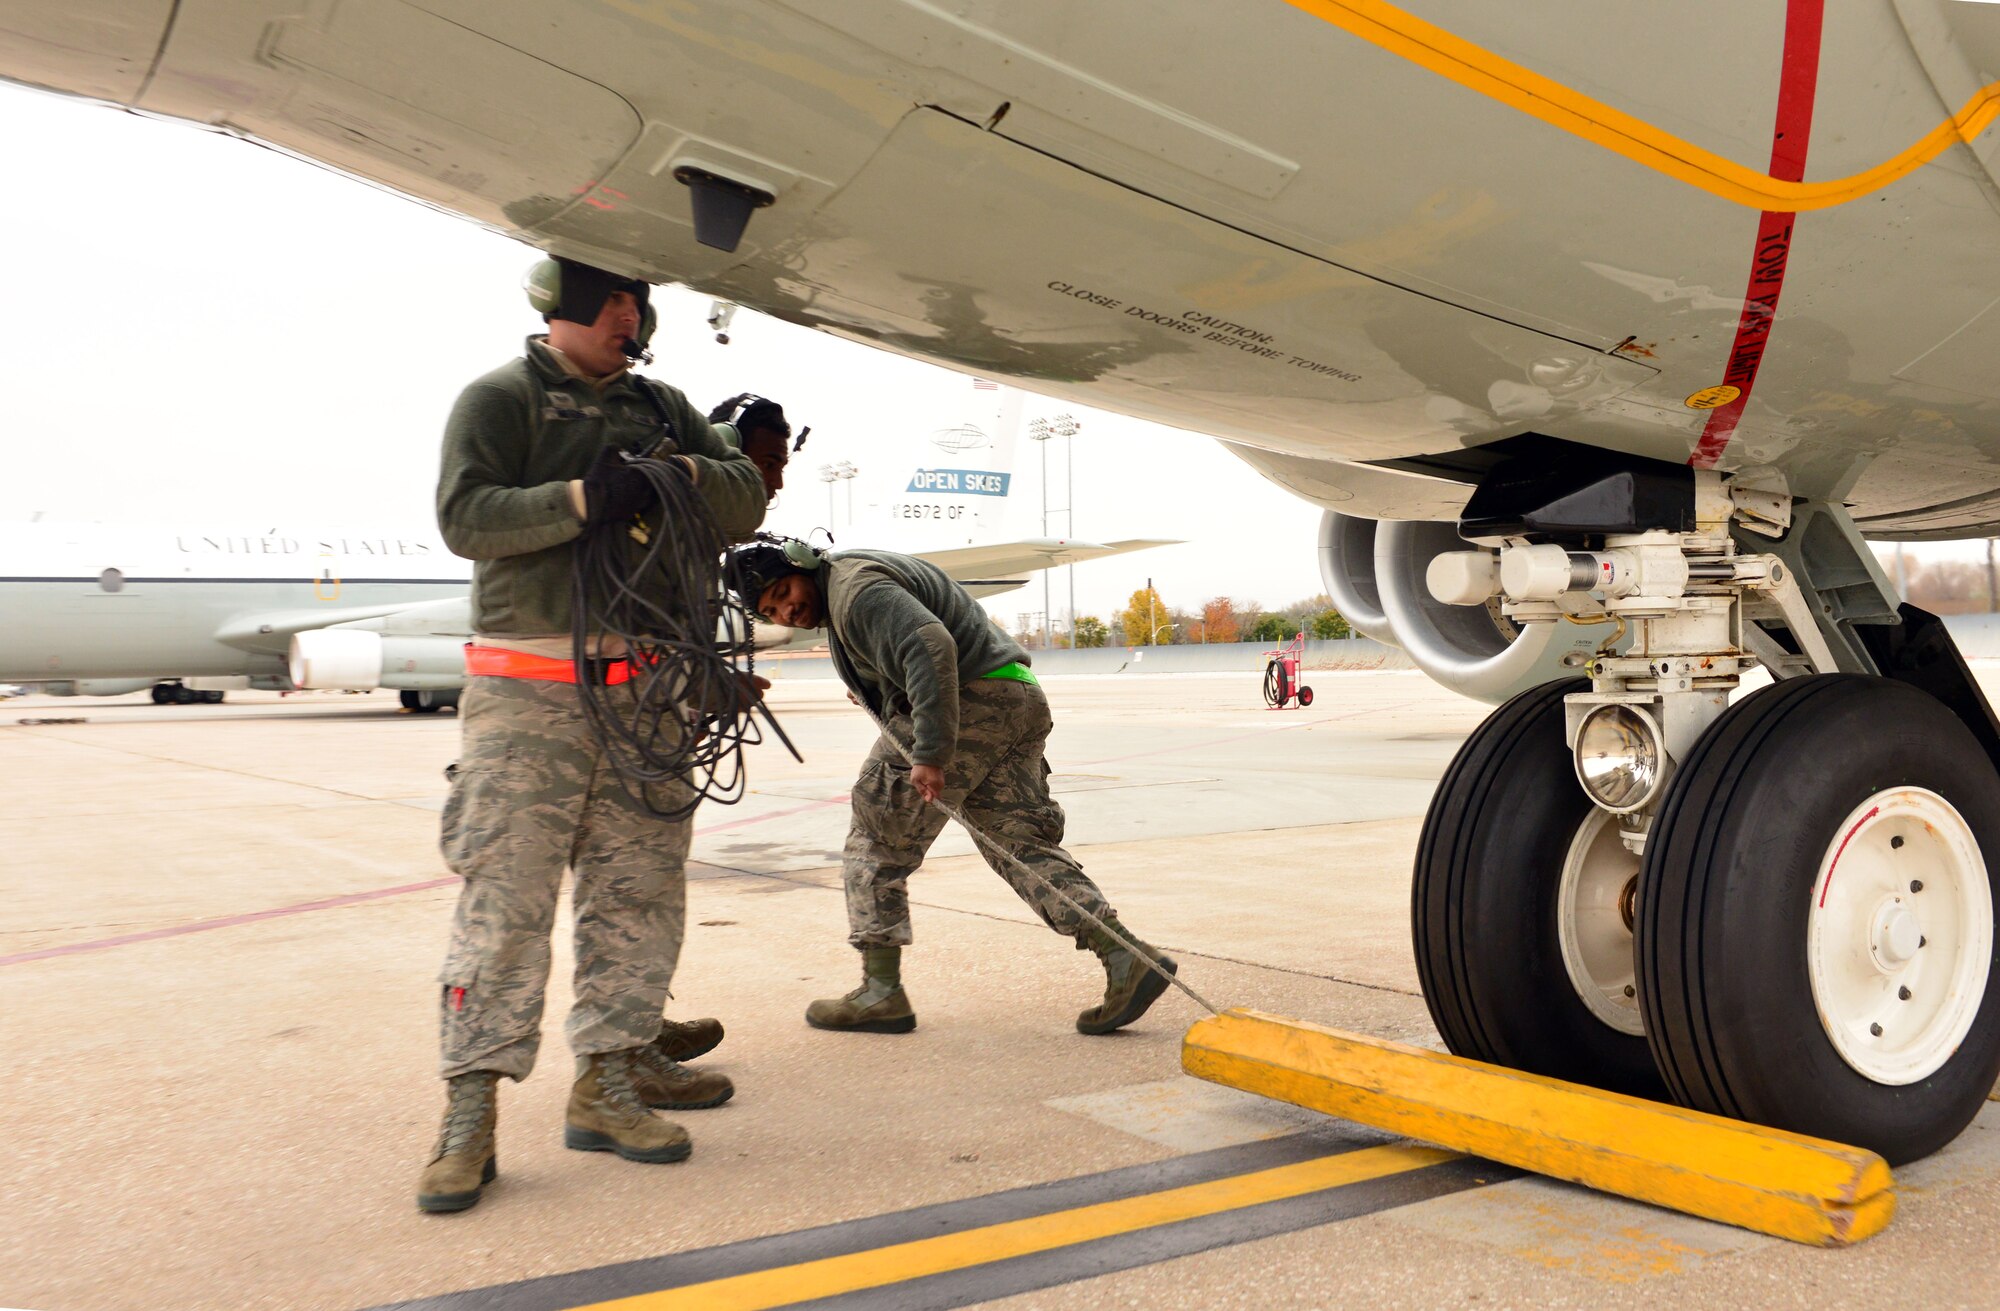 Staff Sgt. Riley Neads, Airman First Class Kejion Madden-Vaughn and Airman First Class Clinton Woods III (from left to right), crew chiefs with the 55th Maintenance Group, finish their preflight tasks, including removing wheel chocks, while preparing to launch an RC-135 V/W Rivet Joint aircraft during Global Thunder 17, U.S. Strategic Command’s annual command post and field training exercise, Oct. 30, 2016, at Offutt Air Force Base, Neb. The exercise provided training opportunities for USSTRATCOM-tasked components, task forces, units and command posts to deter and, if necessary, defeat a military attack against the United States and to employ forces as directed by the President. (U.S. Air Force Photo by Drew Nystrom)